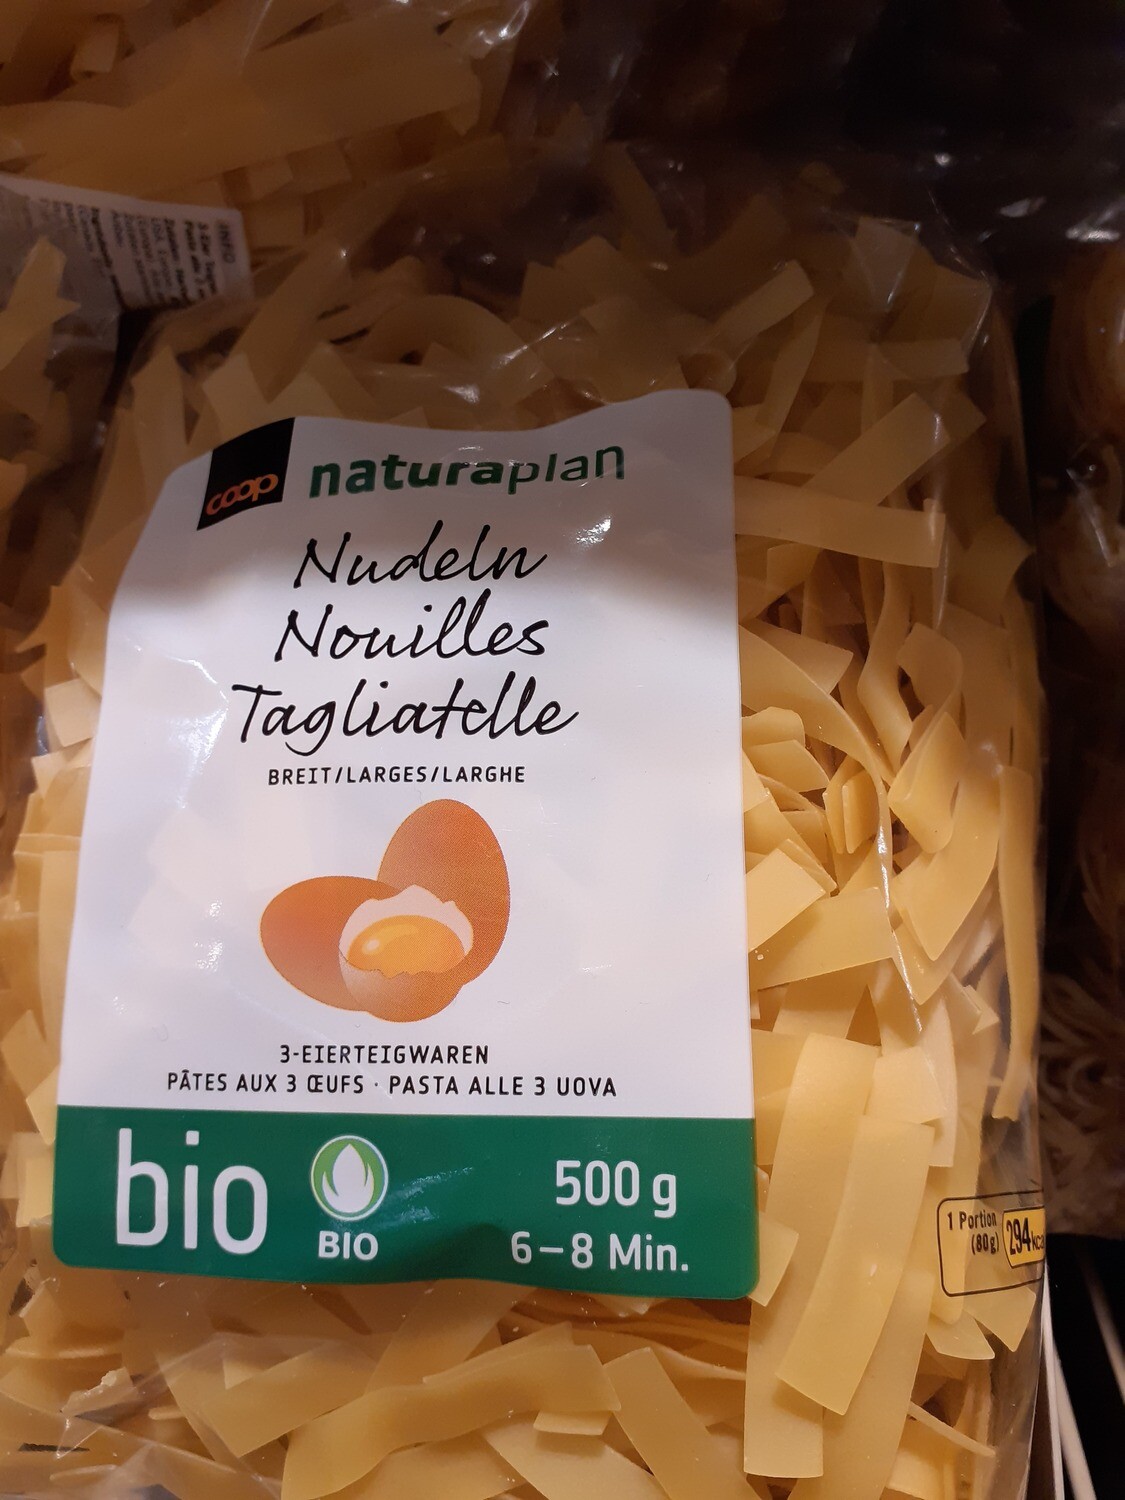 Naturaplan Nudeln larges 3-oeufs 1x500g